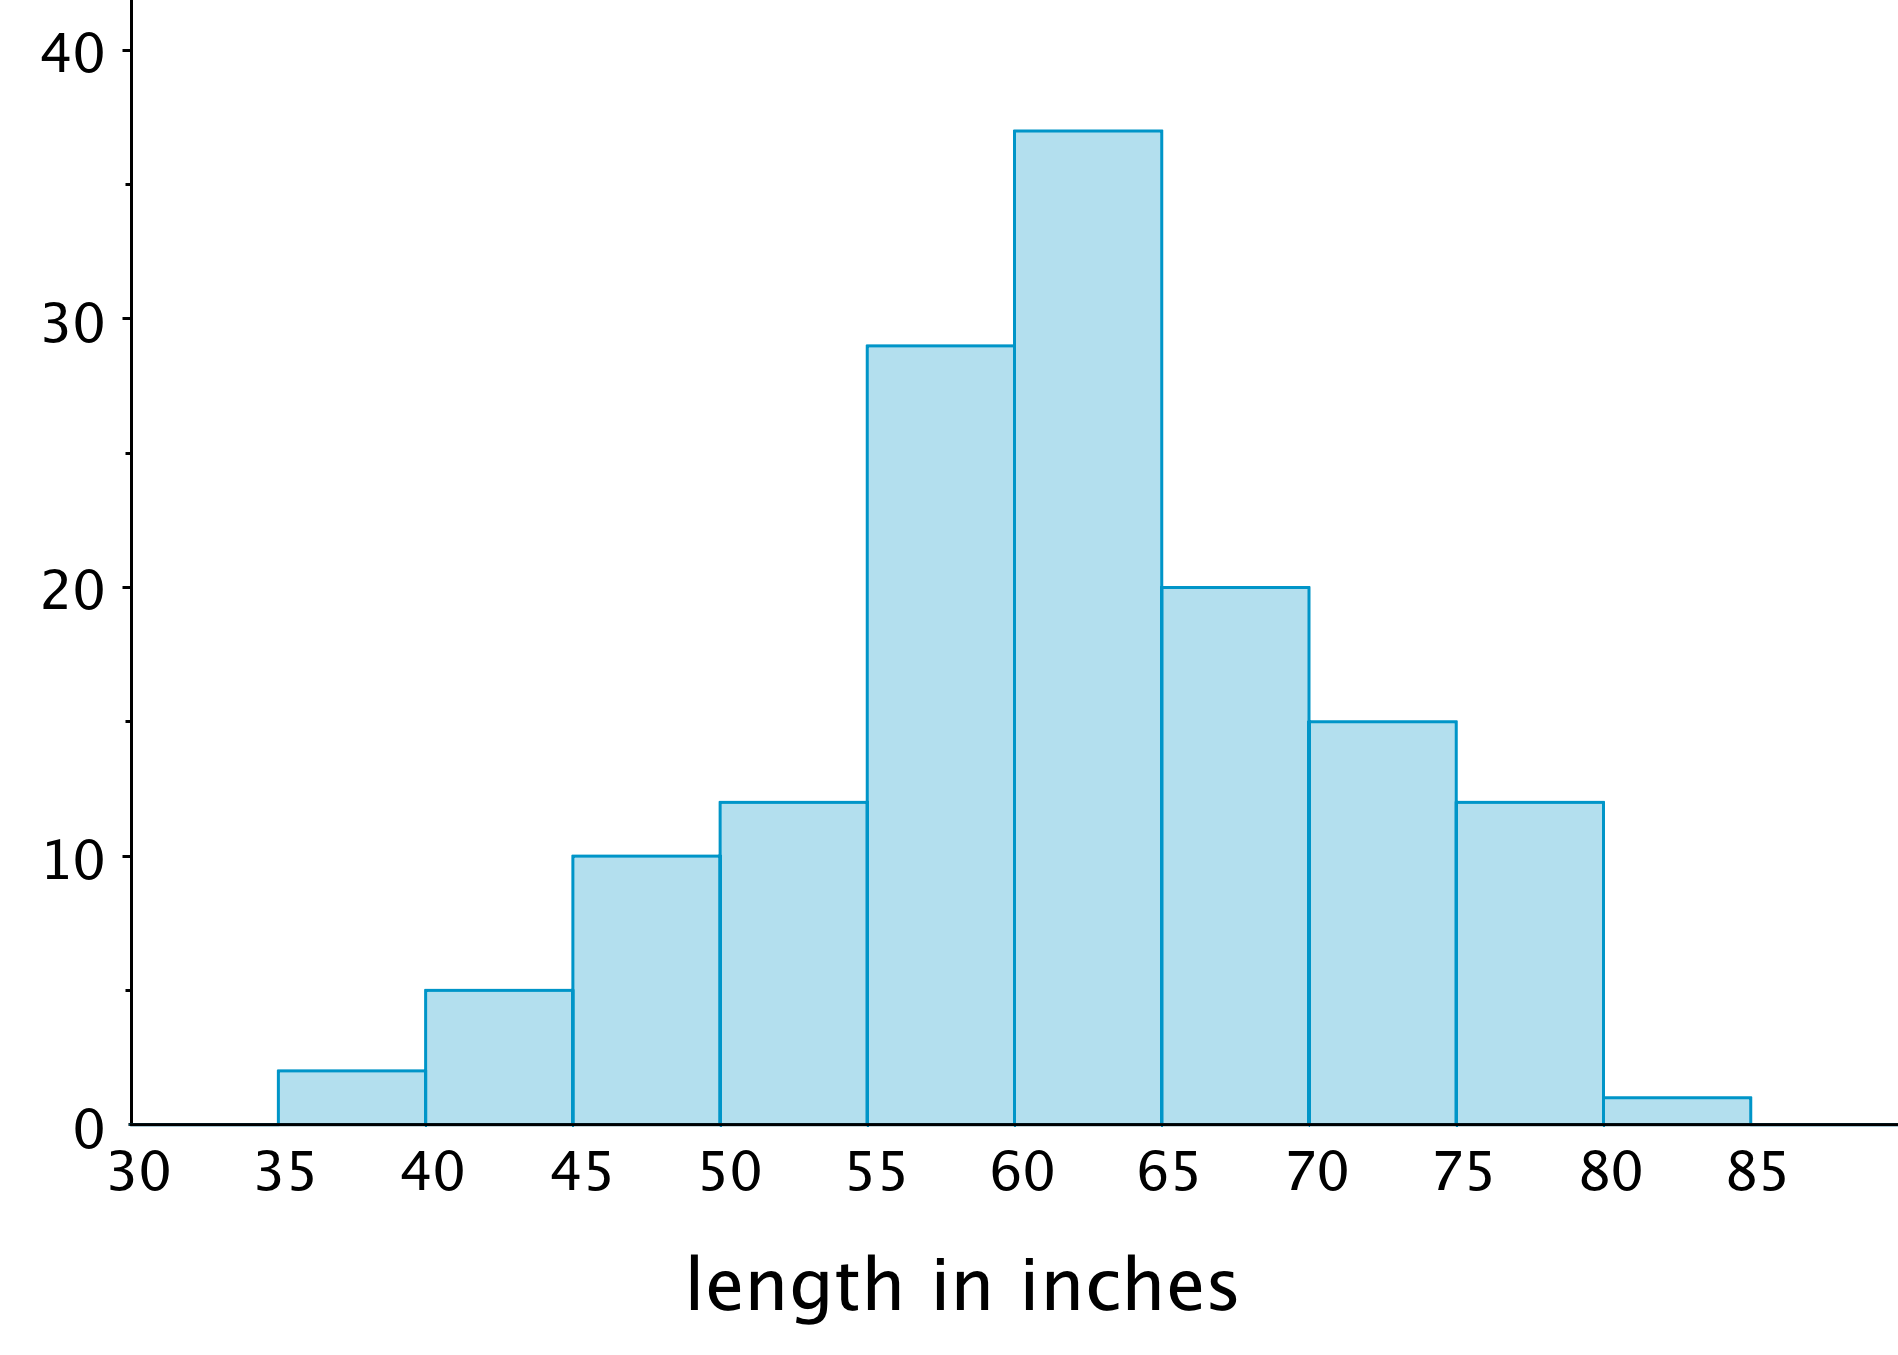 A histogram.  The horizontal axis is labeled “length in inches,” the numbers 30 through 85, in increments of 5, are indicated.  On the vertical axis, the numbers 0 through 40, in increments of 10, are indicated, with tick marks midway between.  The data represented are approximately:  length from 35 up to 40 inches, 2; length from 40 up to 45 inches, 5; length from 45 up to 50 inches, 10; length from 50 inches up to 55 inches, 11; length from 55 up to 60 inches; 30; length from 60 up to 65 inches, 37; length from 65 up to 70 inches, 20; length from 70 up to 75 inches, 15; length from 75 to up to 80 inches, 11; length from 80 up to 85 inches, 1.